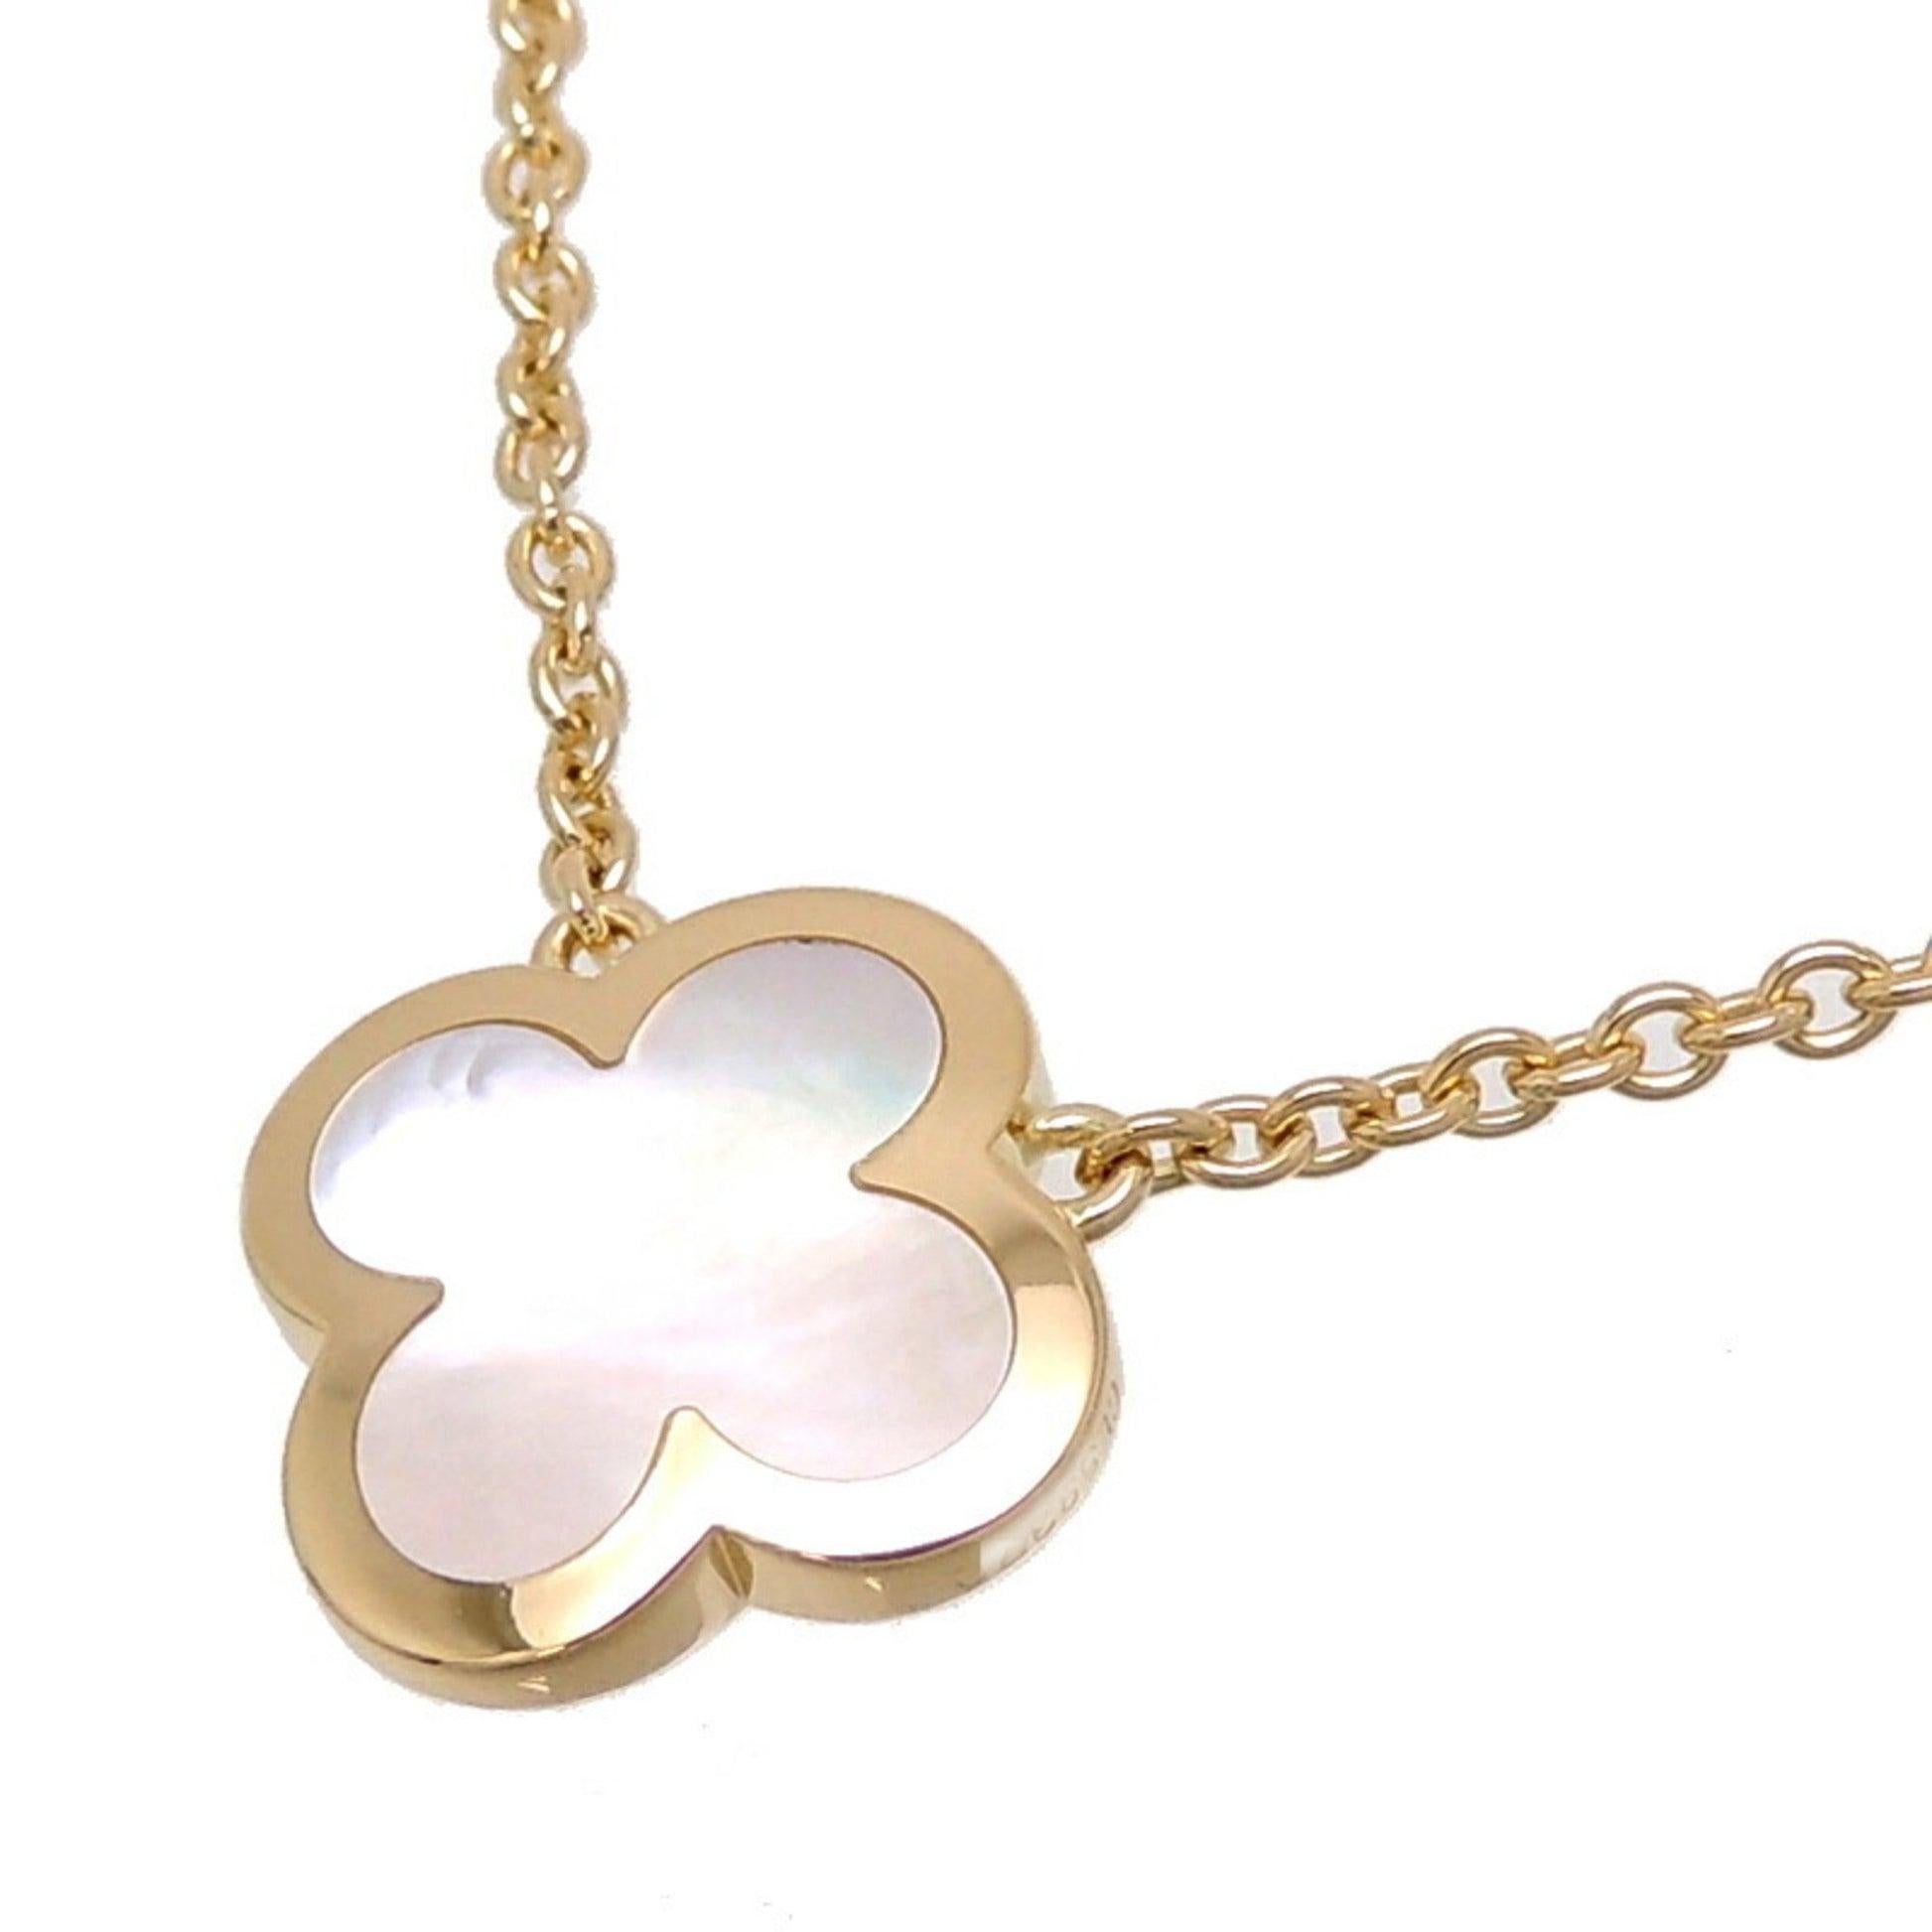 Van Cleef & Arpels Pure Alhambra Necklace in Yellow Gold

Additional Information:
Brand: Van Cleef & Arpels
Gender: Women
Line: Alhambra
Gemstone: Shell
This item has been used and may have some minor flaws. Before purchasing, please refer to the